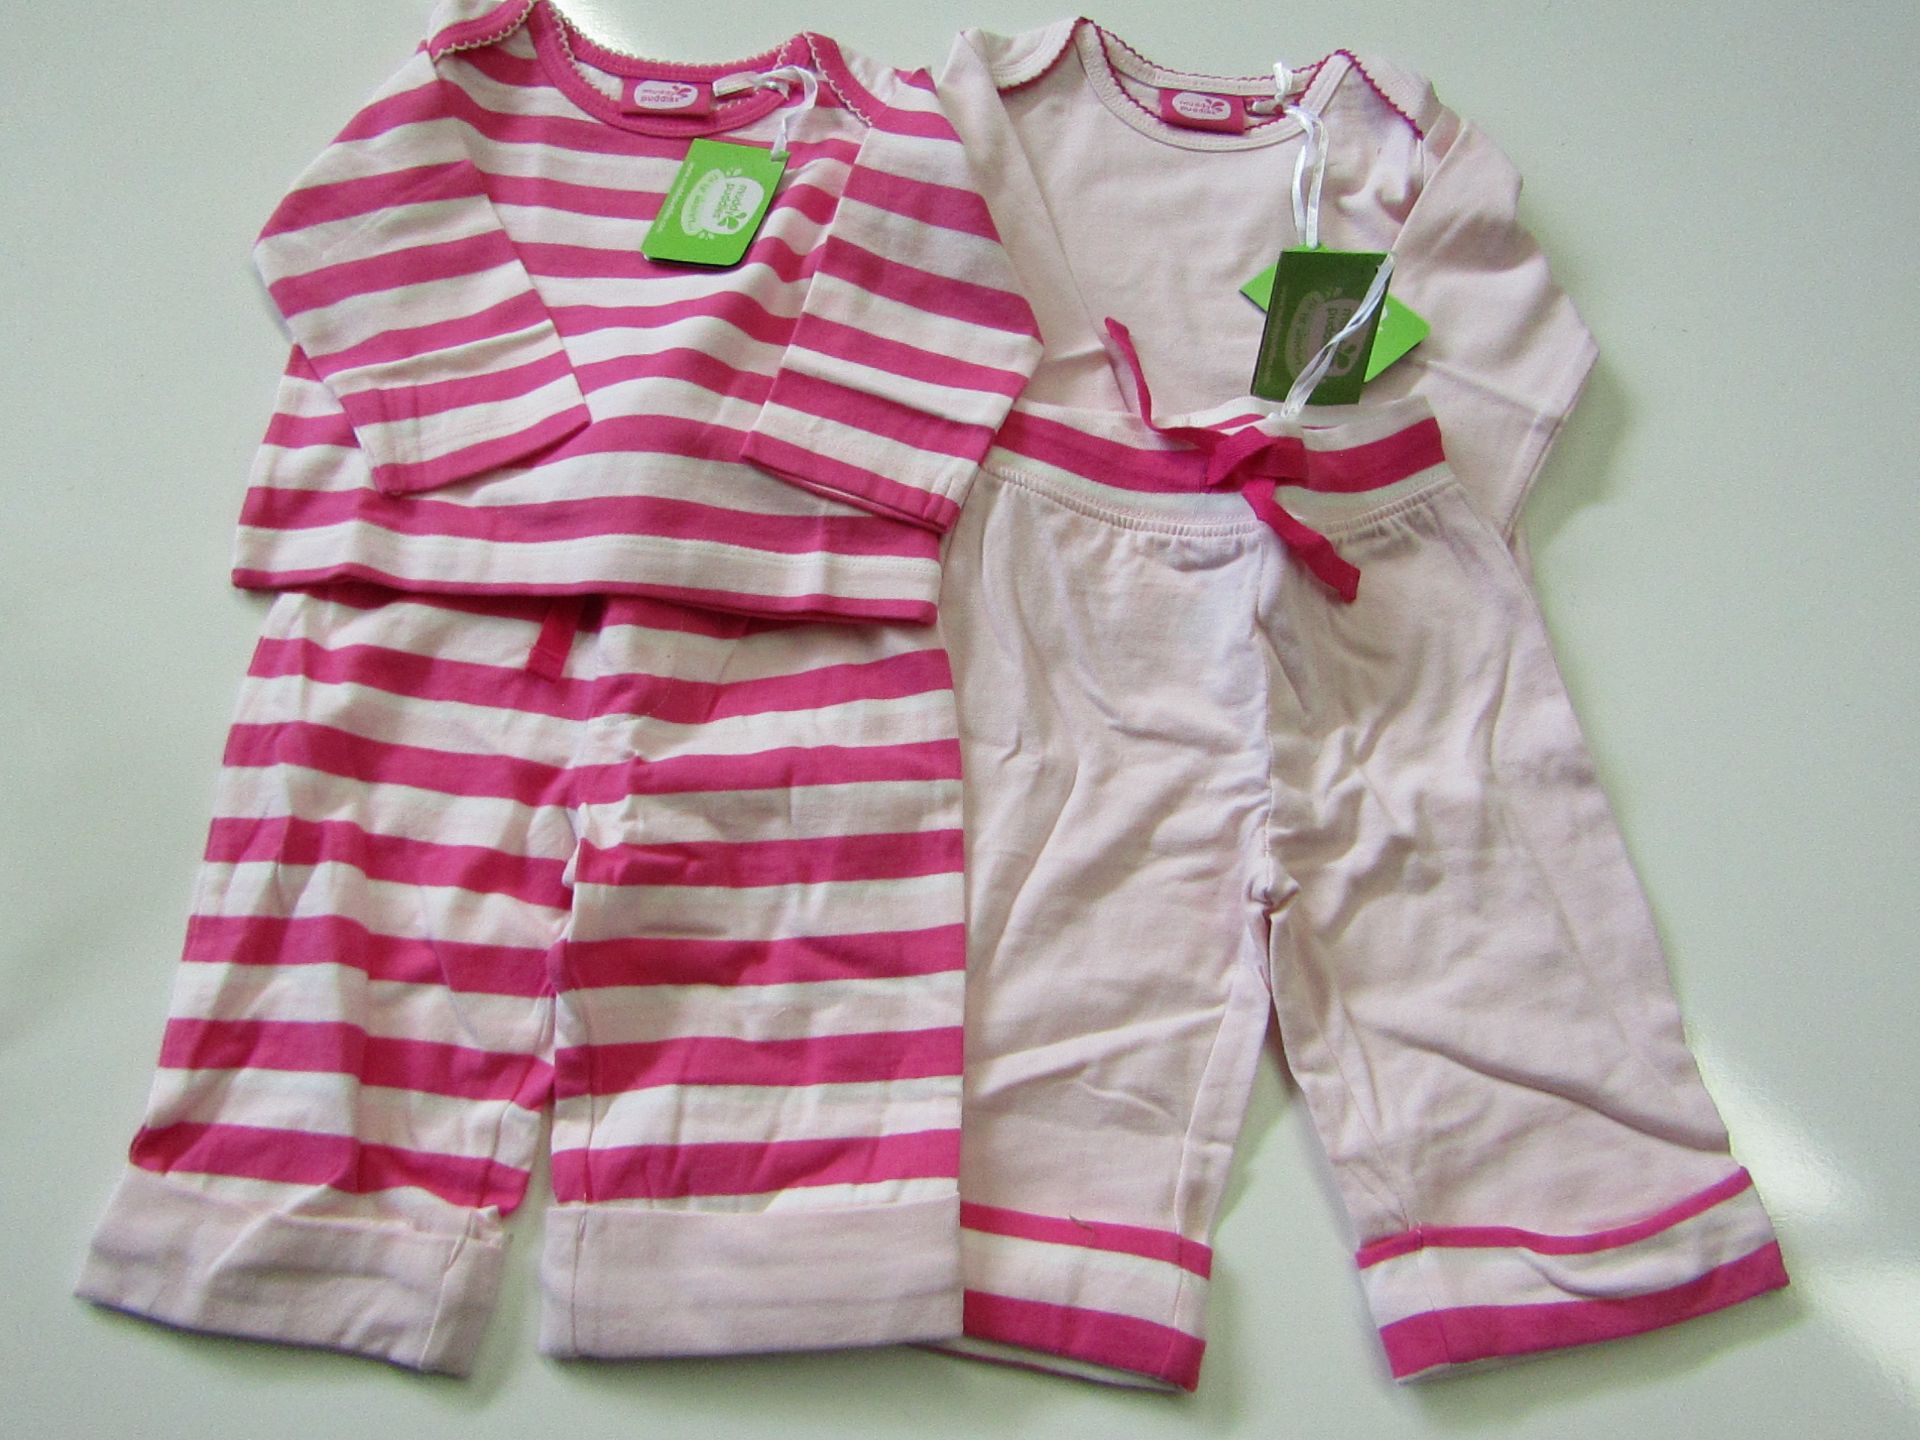 Muddy Puddles 3 X PKS of 2 Baby Tops 1 X Stripped 1 X Plain 3-6 Months Pink New & Packaged